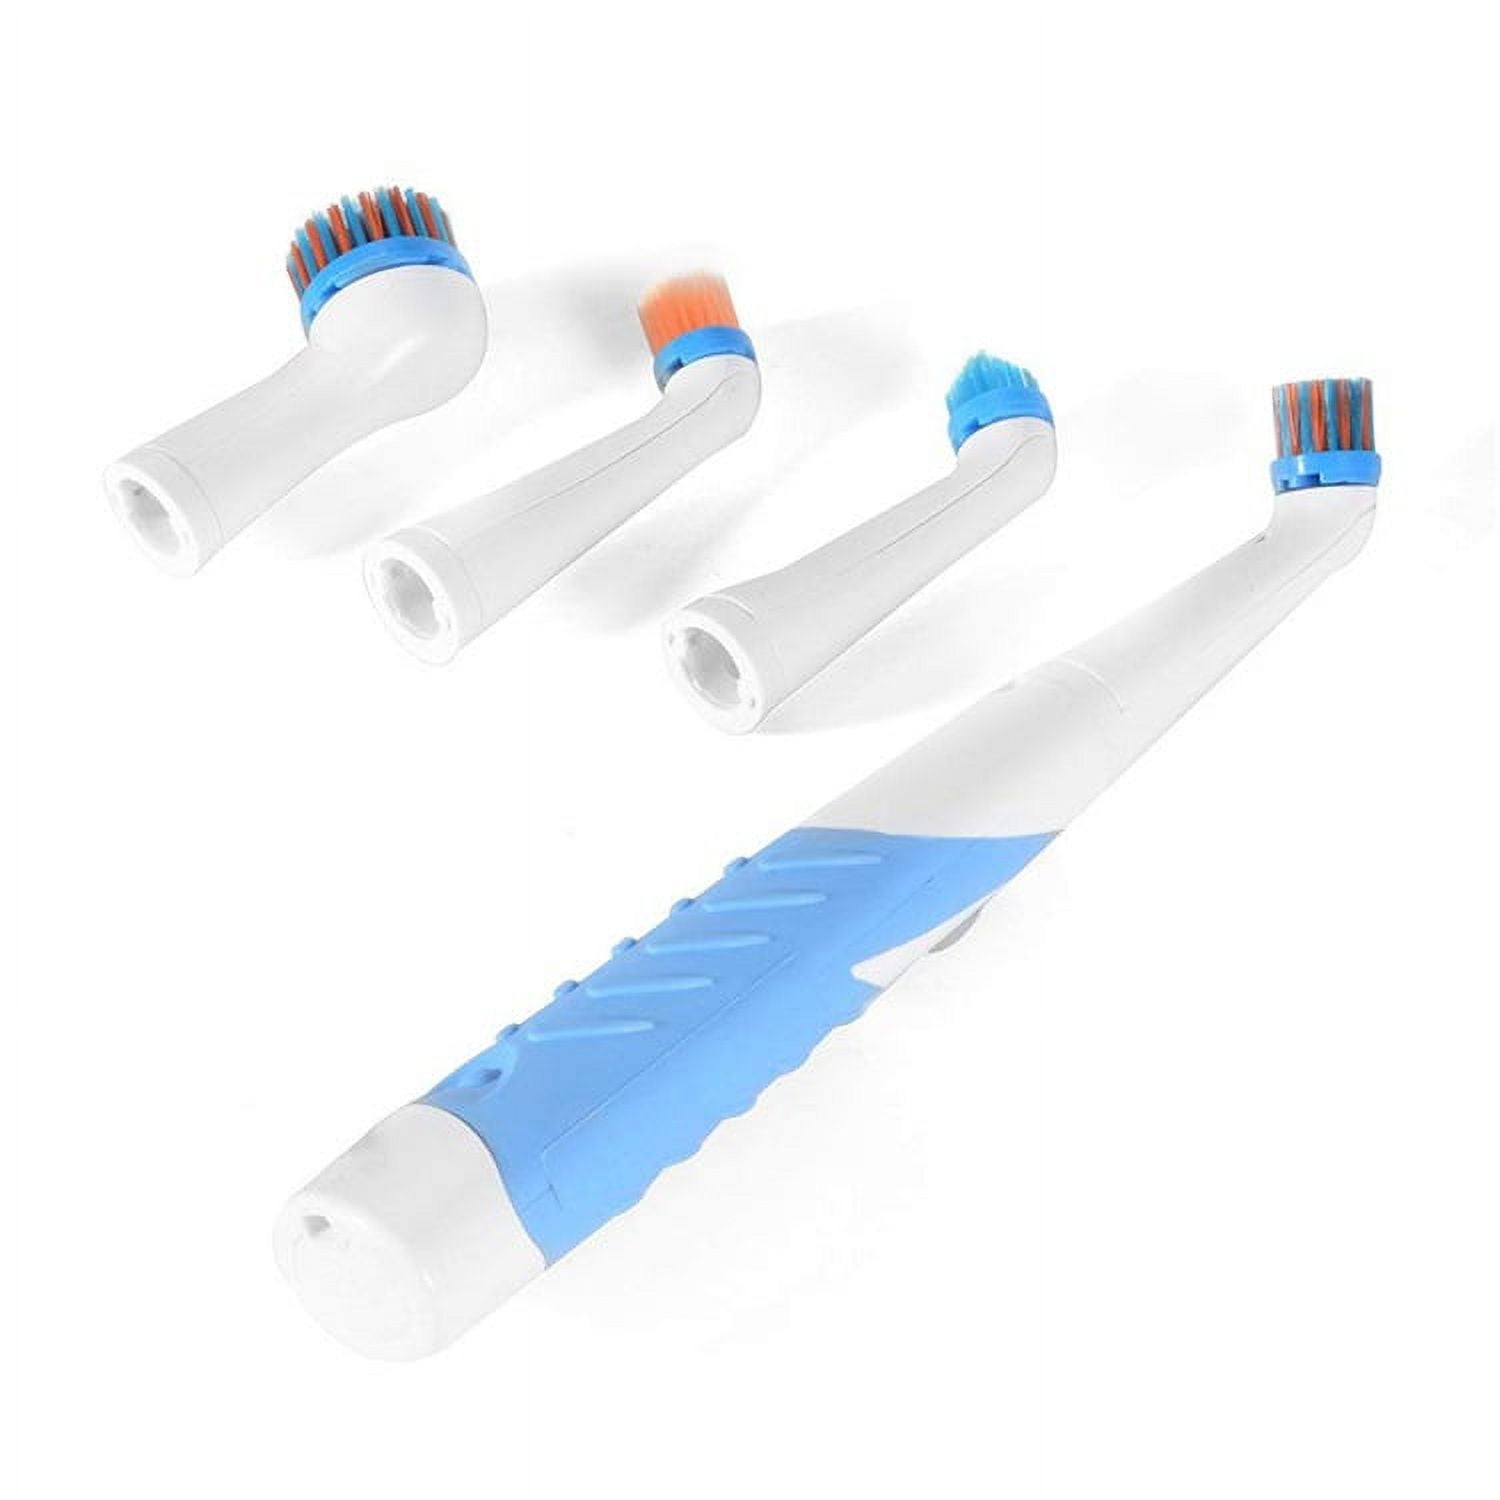 electric cleaning brush with Household All Purpose 4 Brush Heads by Sonic  Scrubber for Bathroom/Kitchen & Shoes Household power scrubber brush